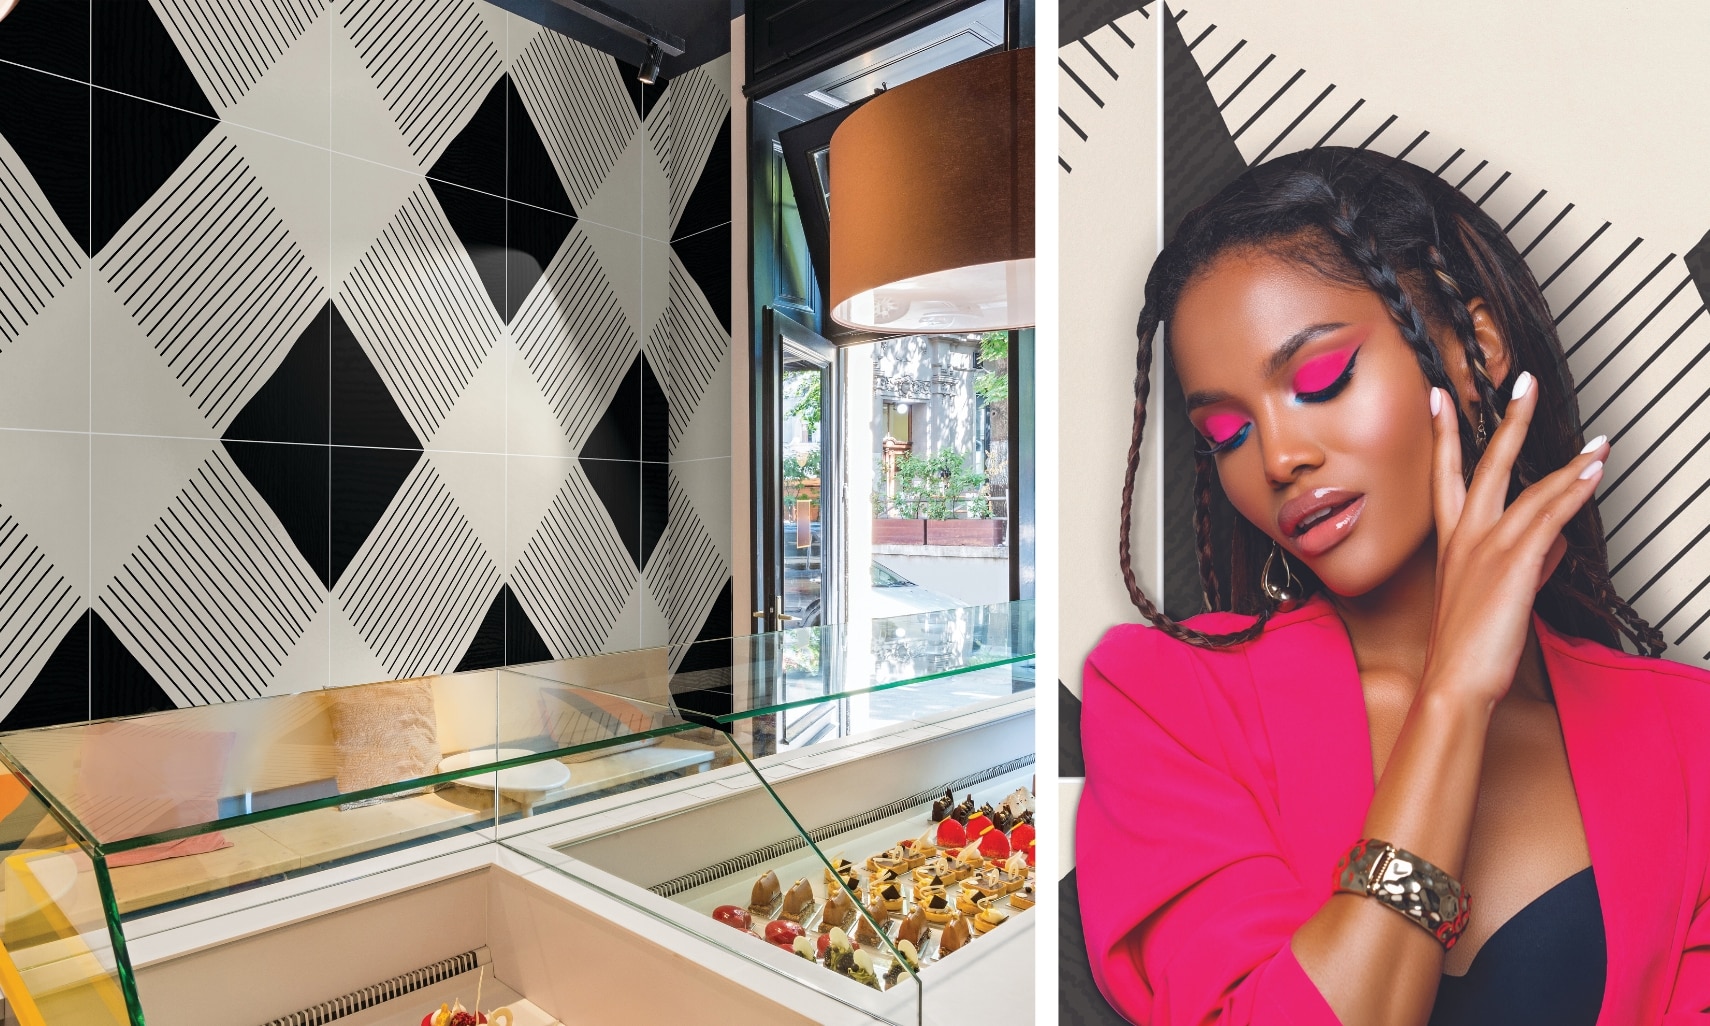 Collage of an epicurean café with white and black geometric wall tile, and a woman wearing a bright pink jacket in front of a white and black geometric wall tile.